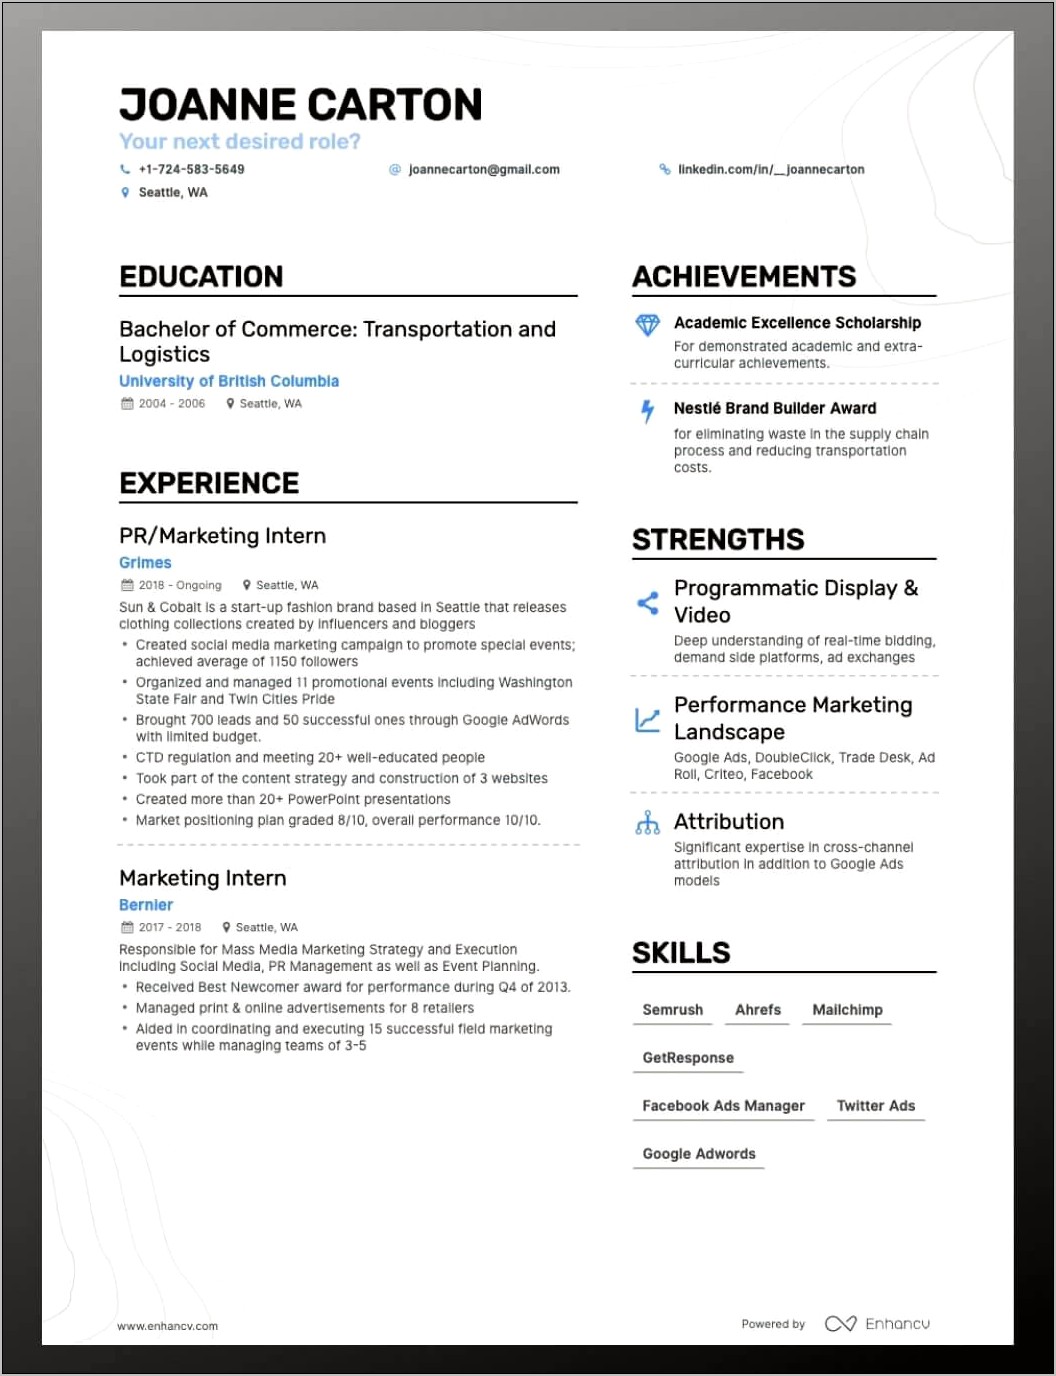 Different Types Of Skills On Resume